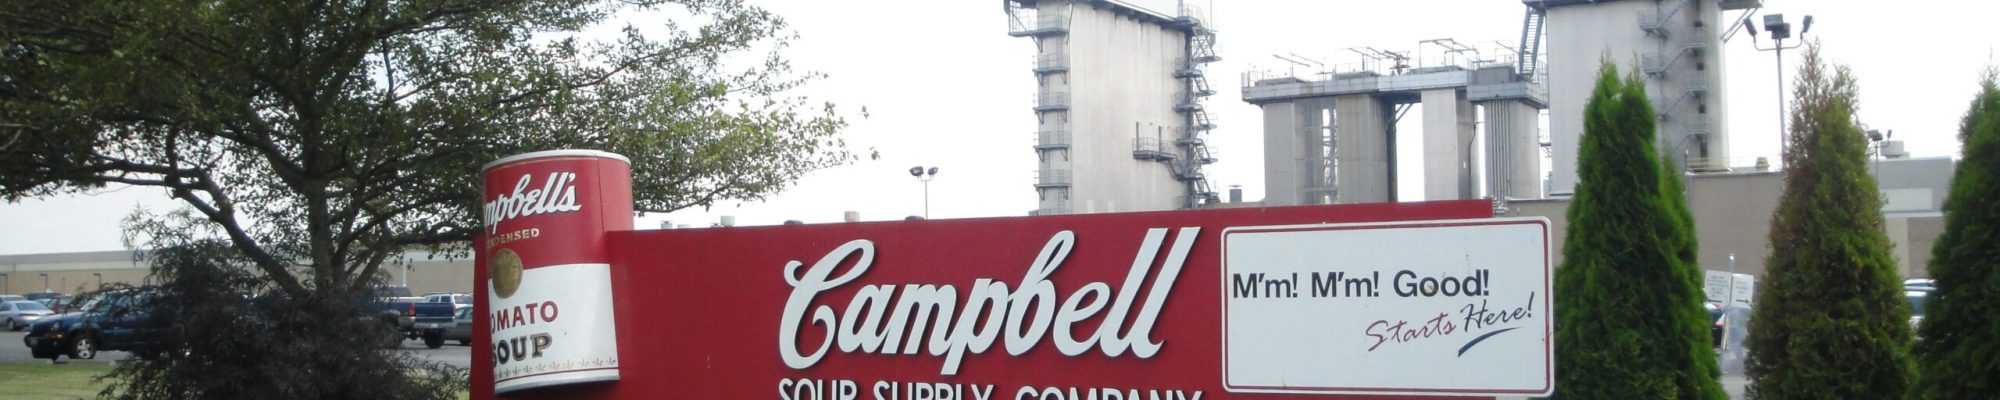 Campbell Soup Company – RO Blended Water System-3